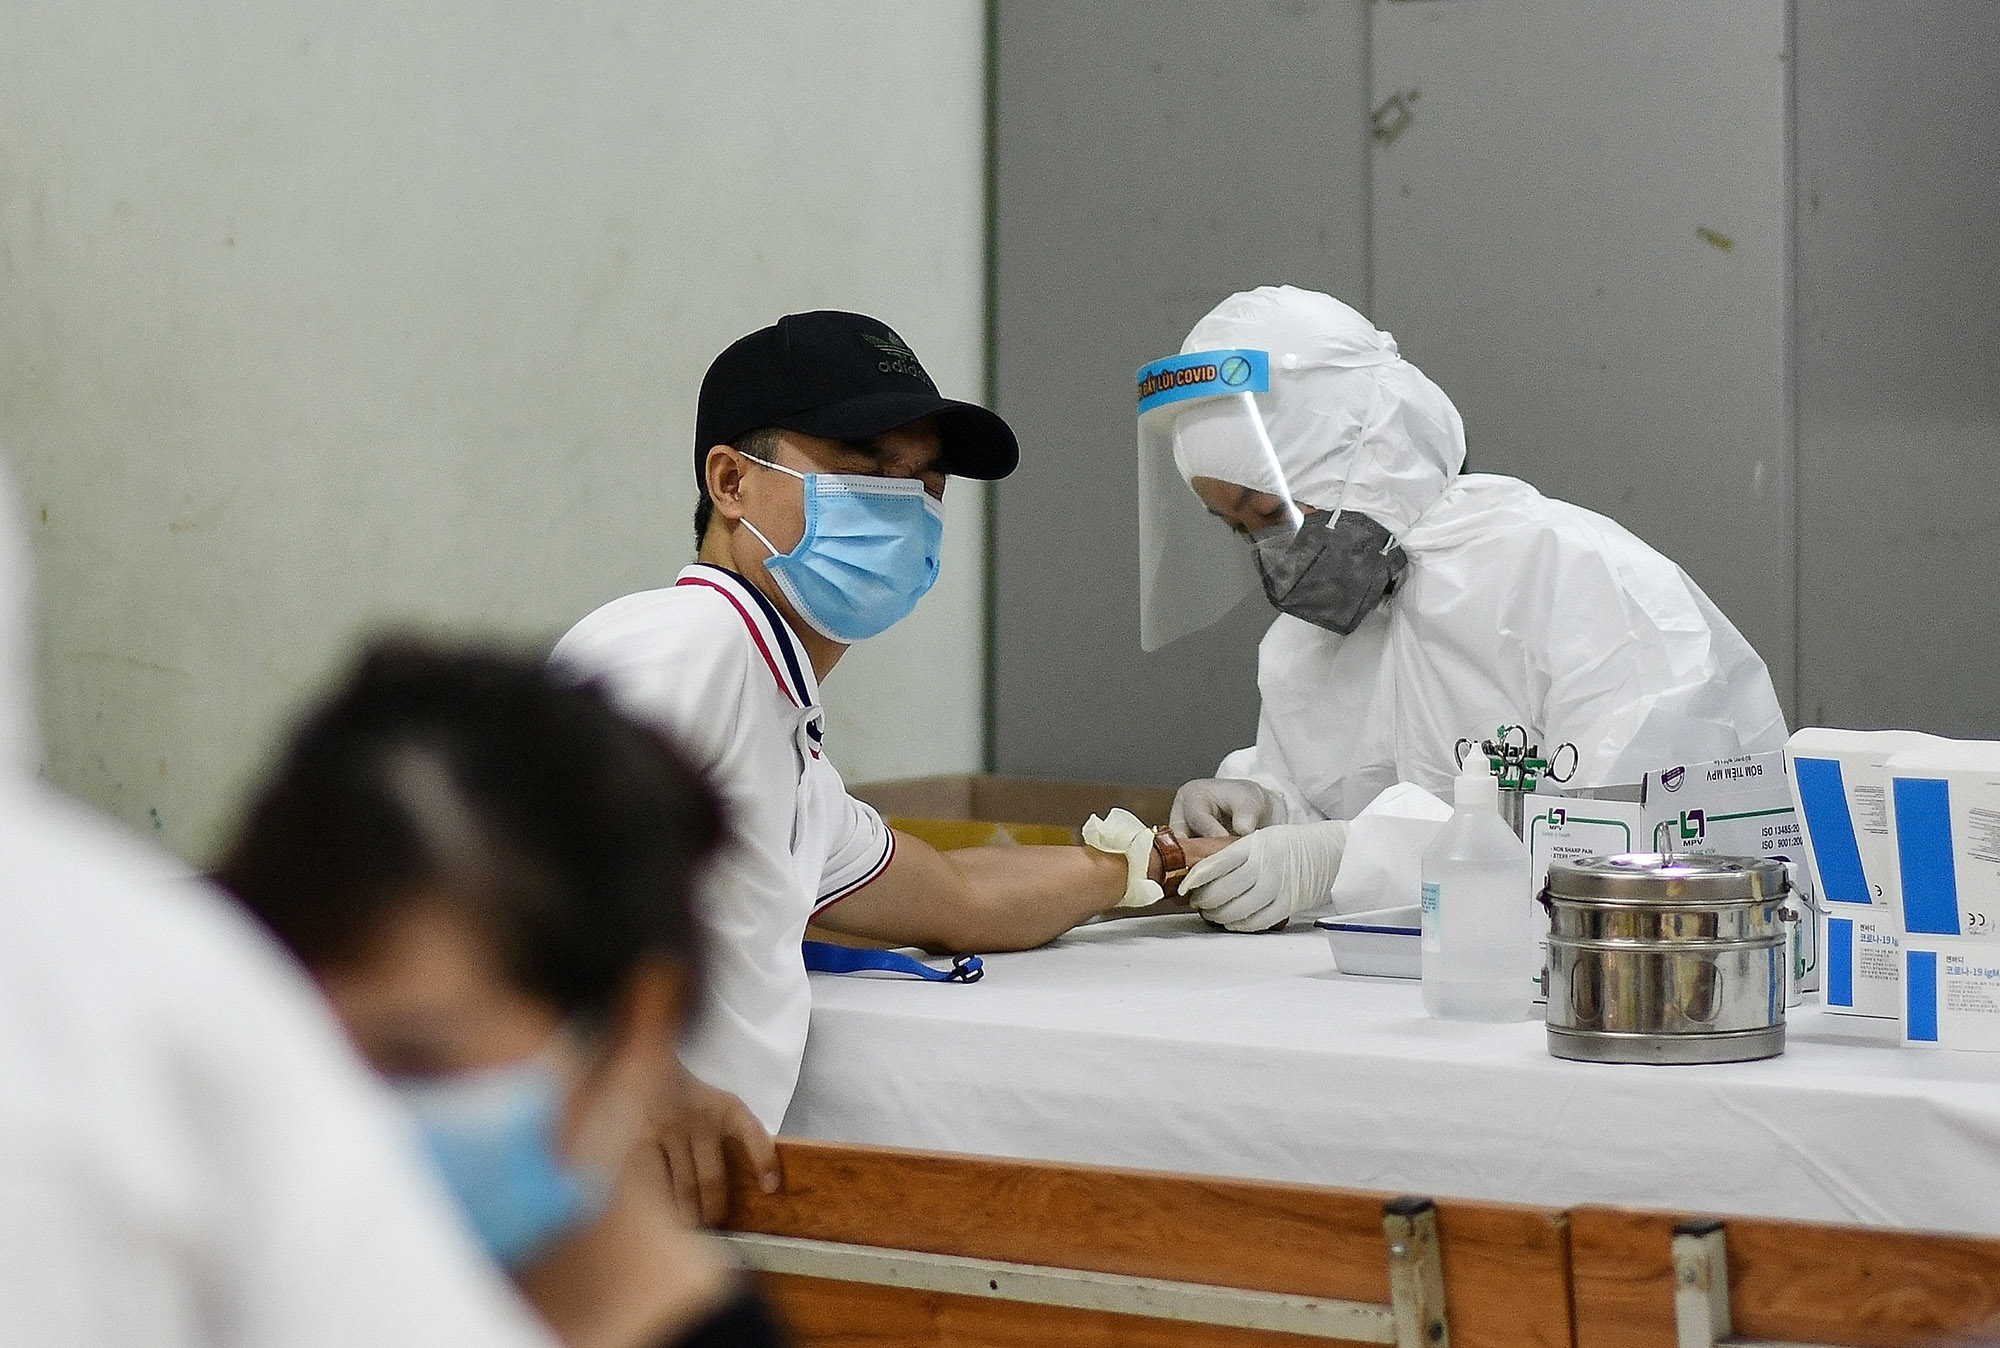 A man grimaces as health workers collect his blood sample at a Covid-19 rapid testing center in Hanoi, Vietnam, on August 1. 